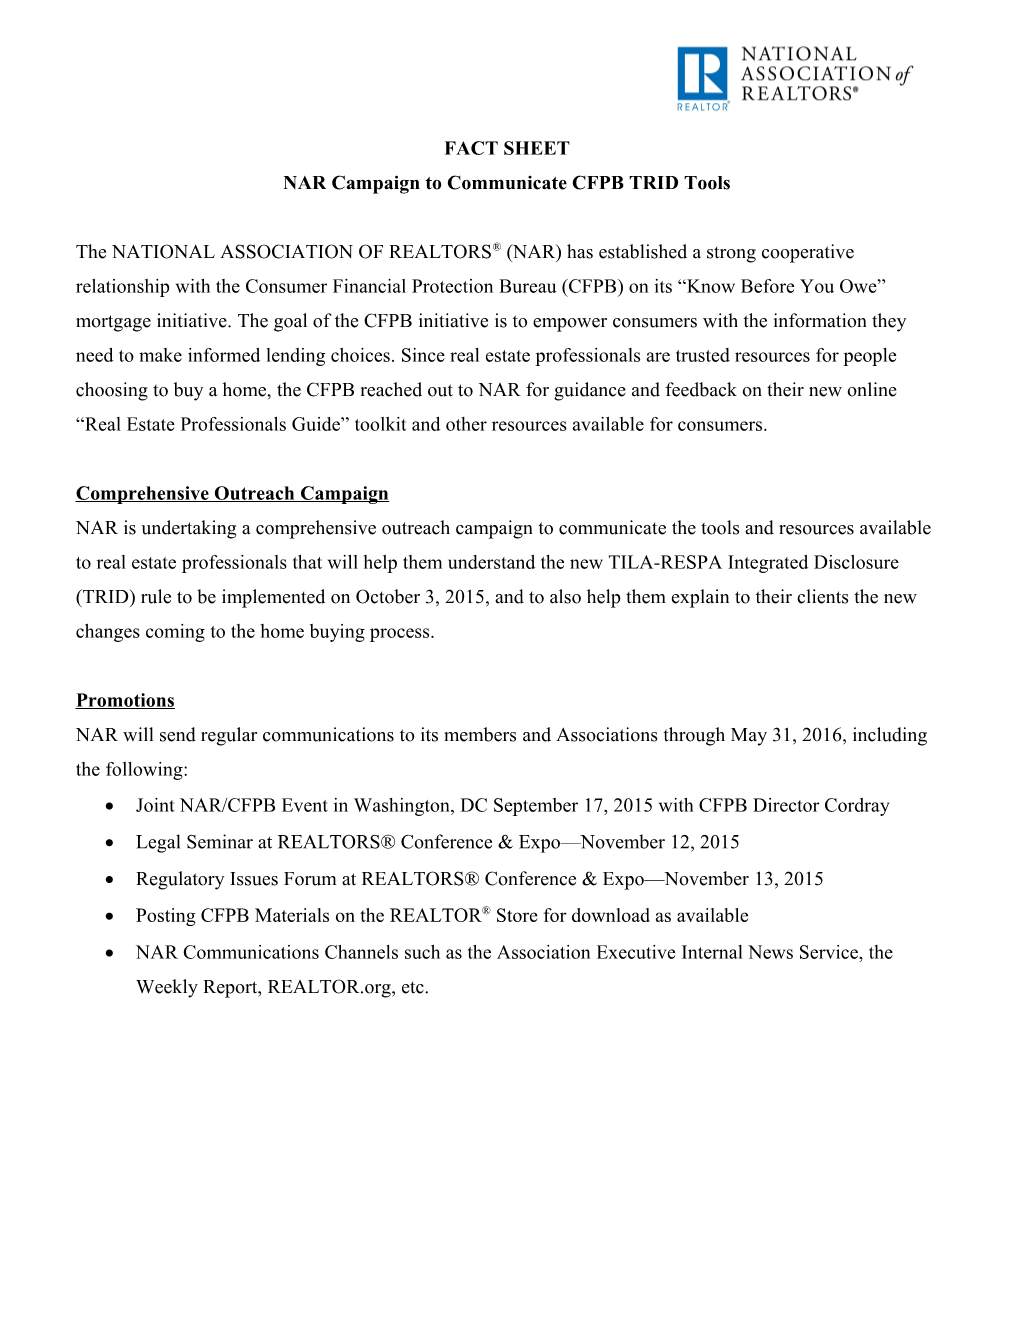 Fact Sheet NAR Campaign to Communicate CFPB TRID Tools